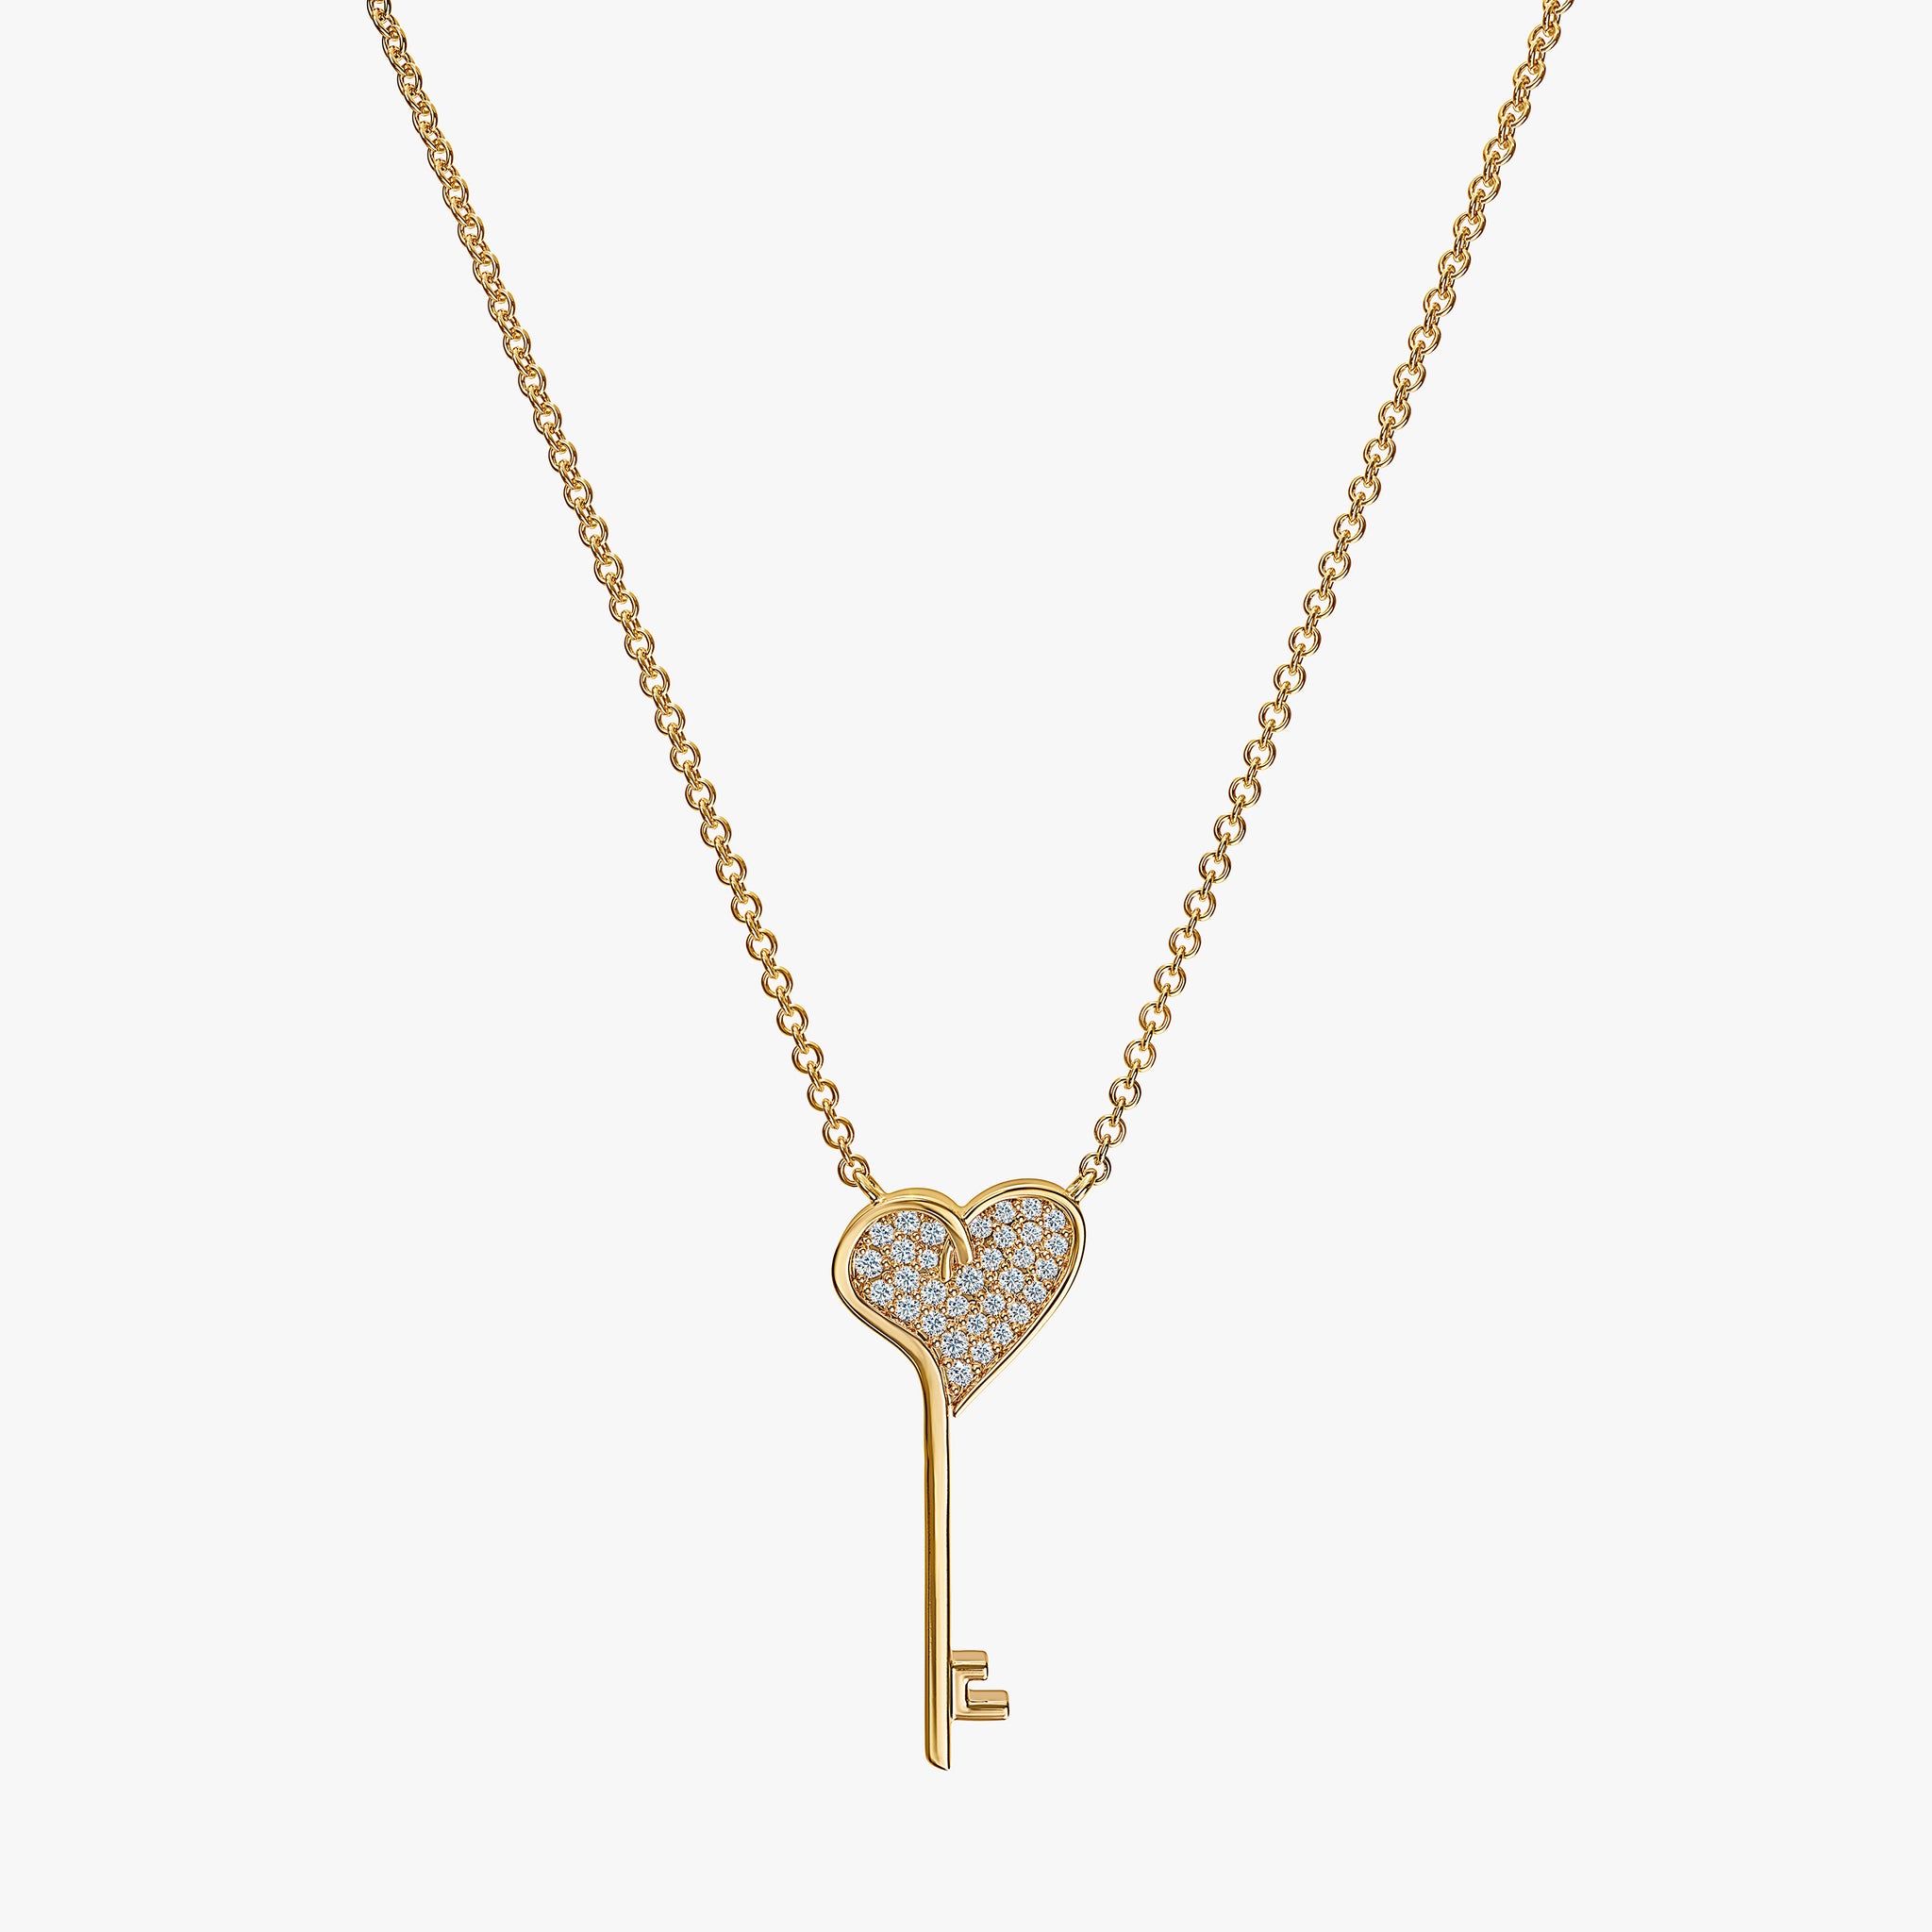 J'EVAR 14KT Yellow Gold Heart Key ALTR Lab Grown Diamond Necklace Front View | 0.10 CT